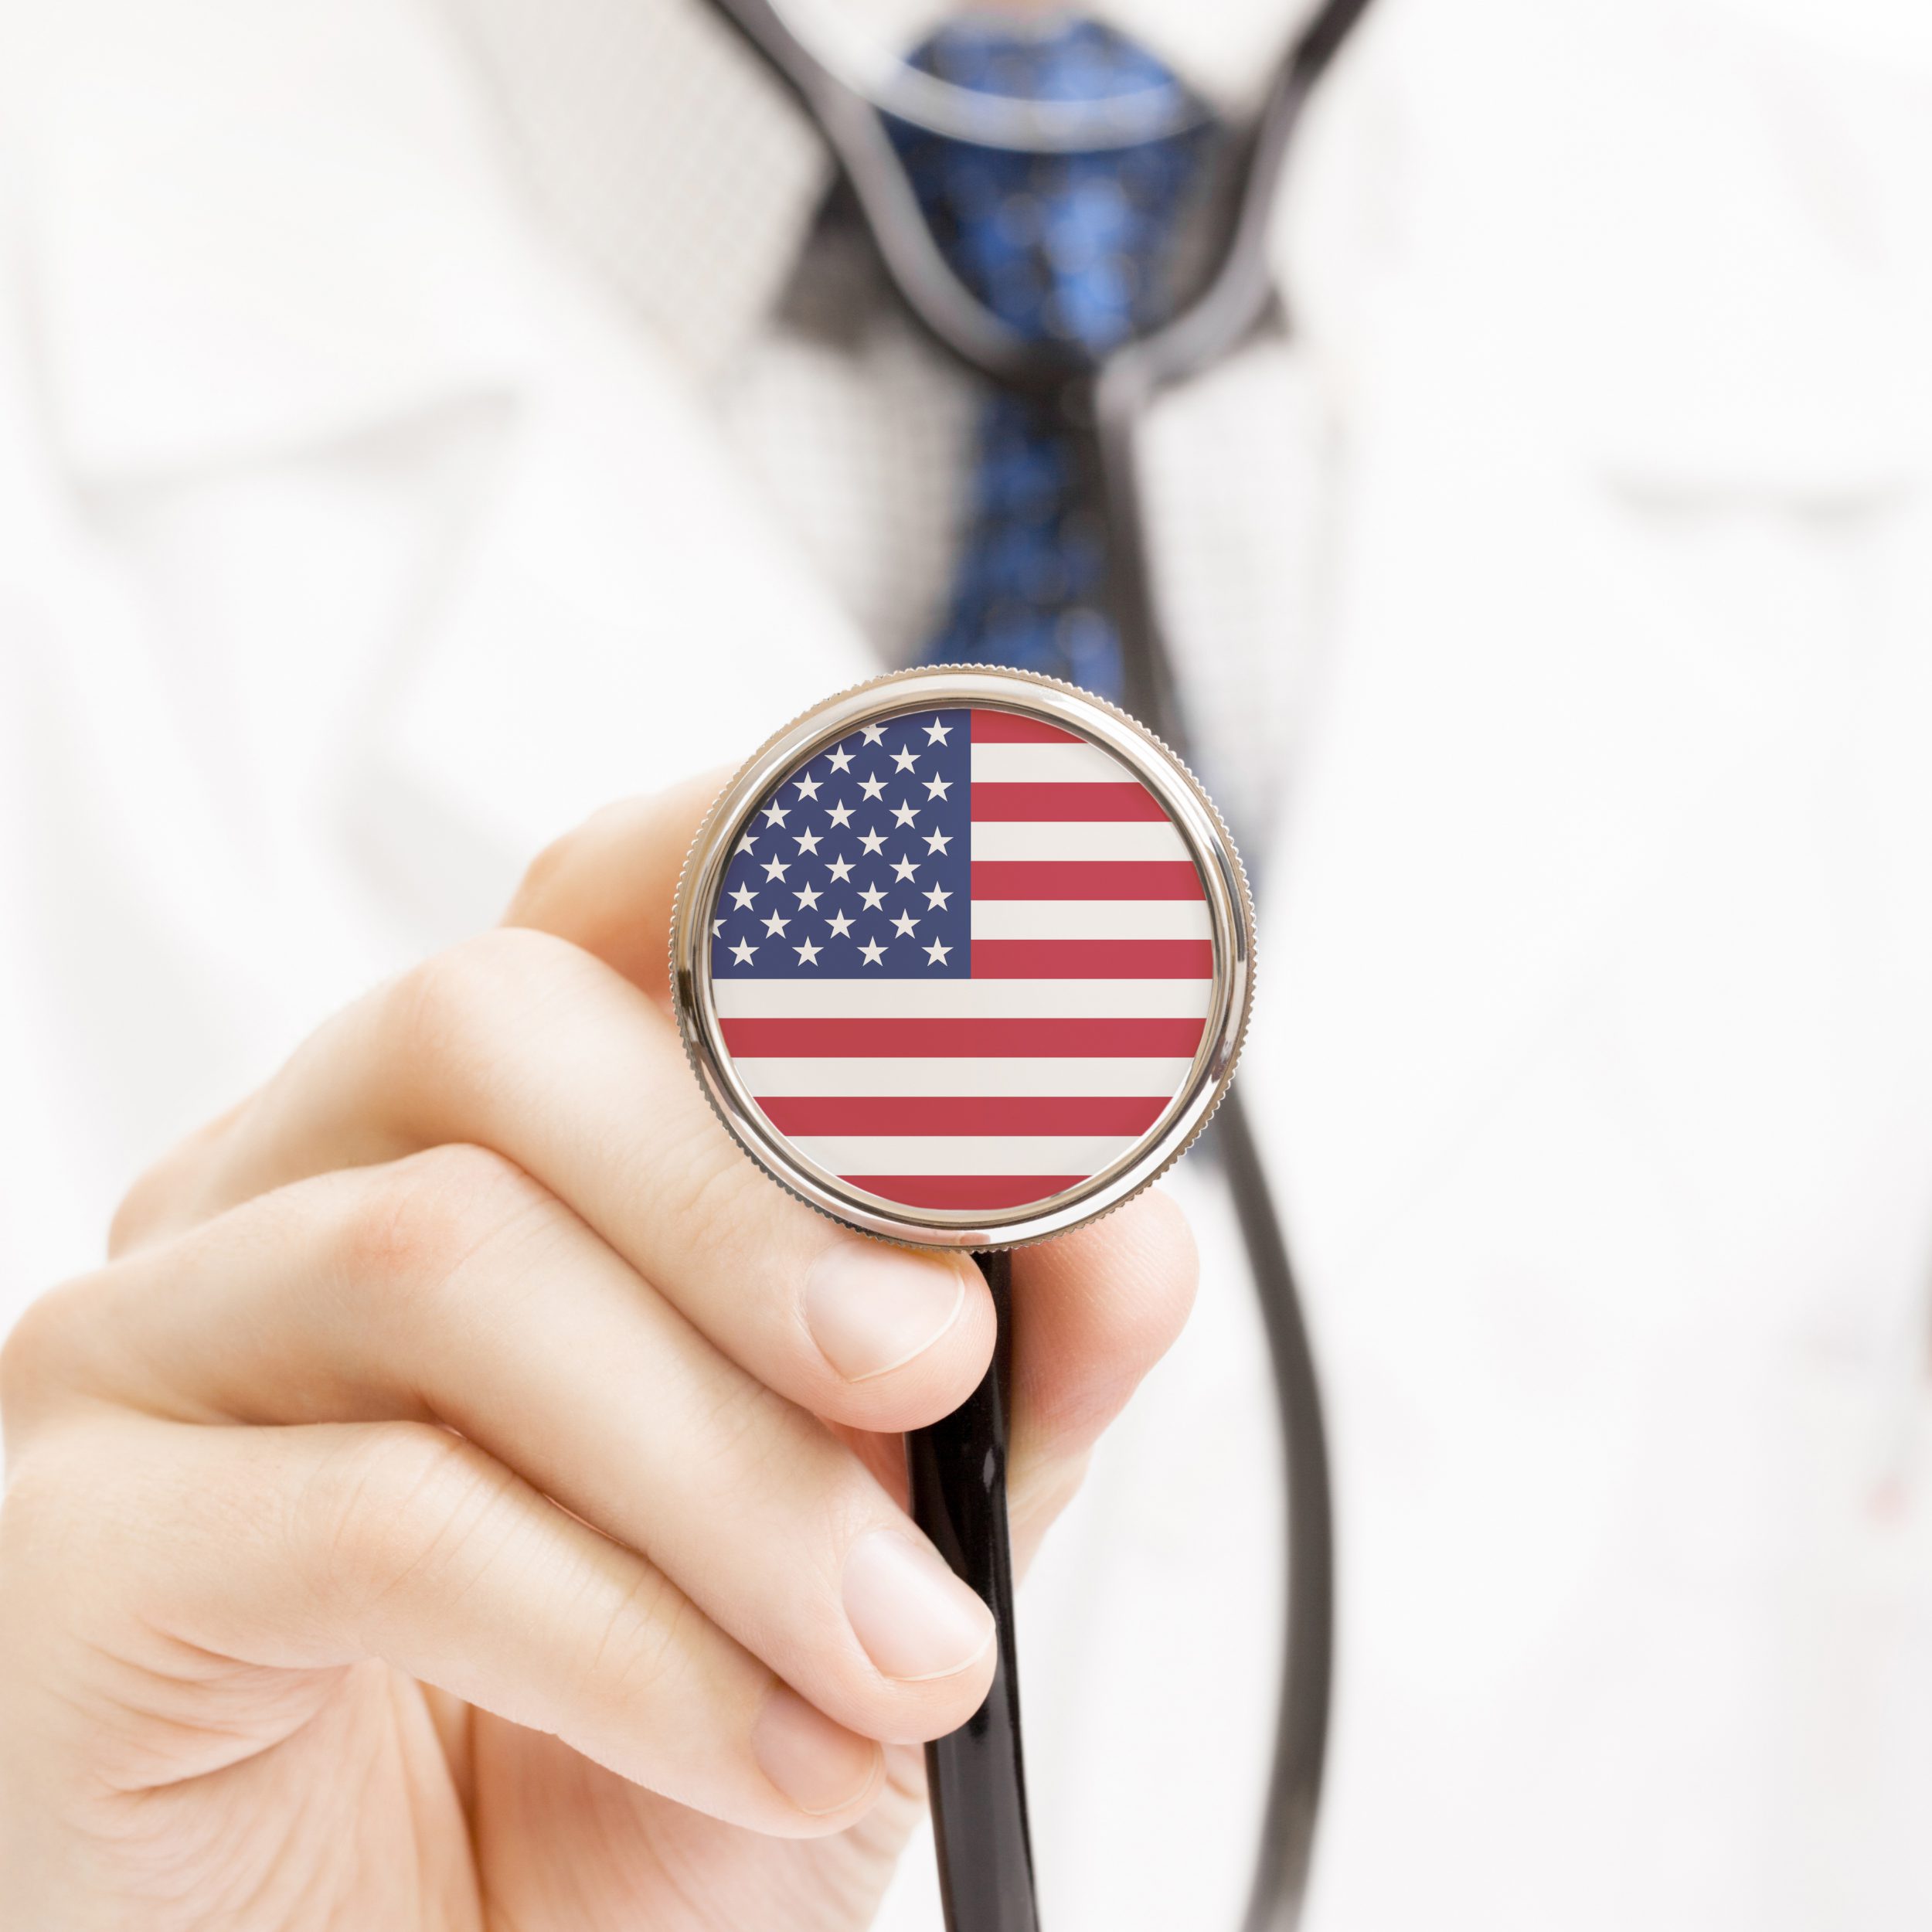 National flag on stethoscope conceptual series - United States